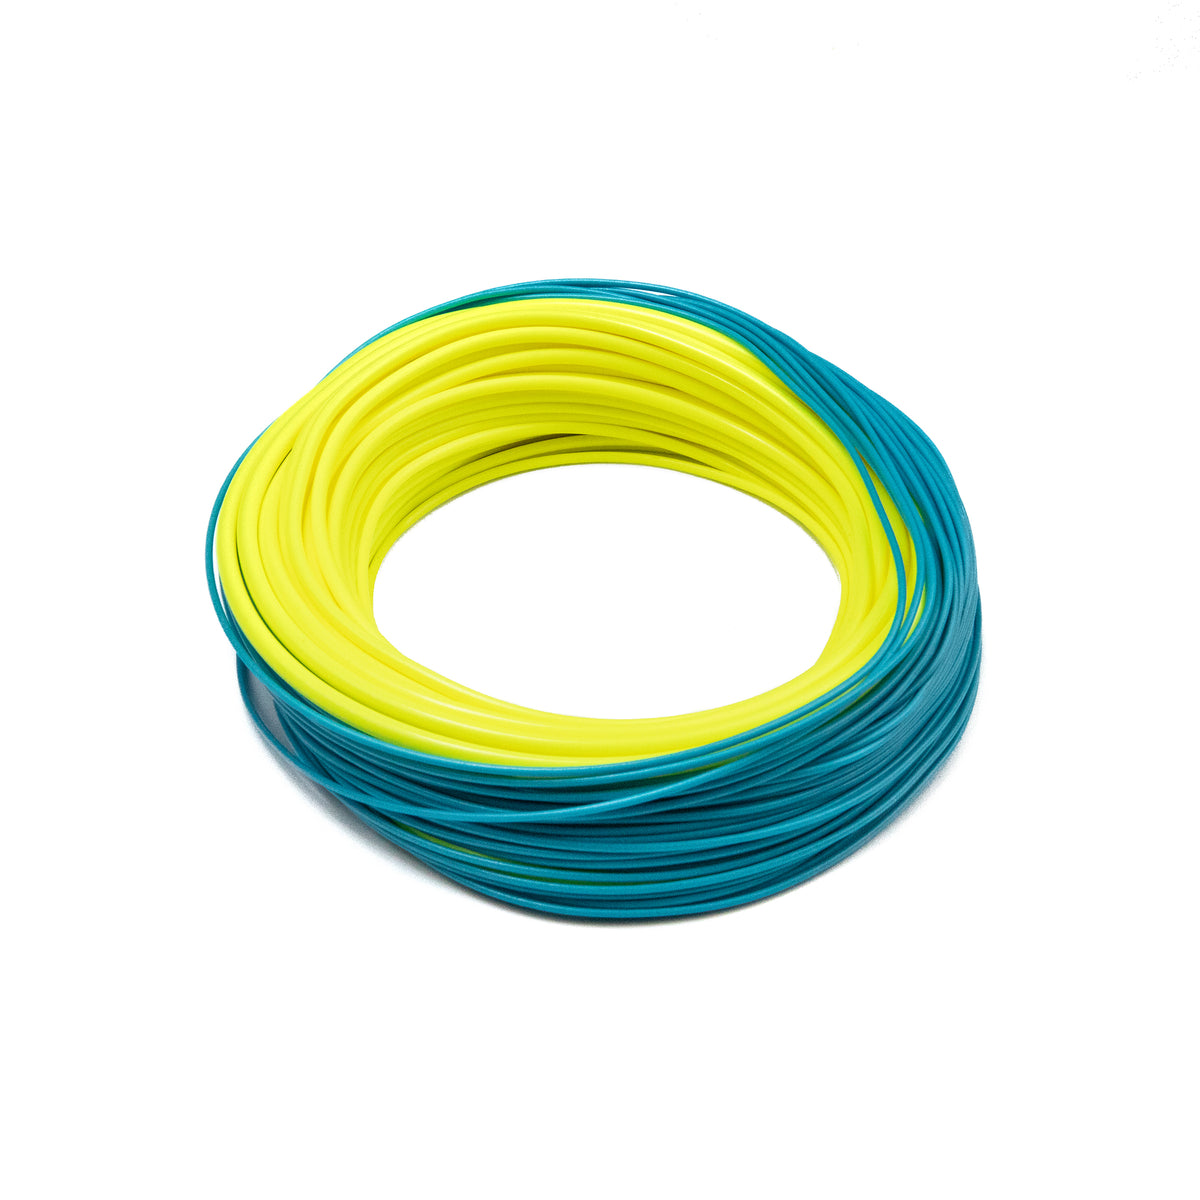 EaziCast - Fly Fishing Wrist Support - Fly Fishing Casting Aid